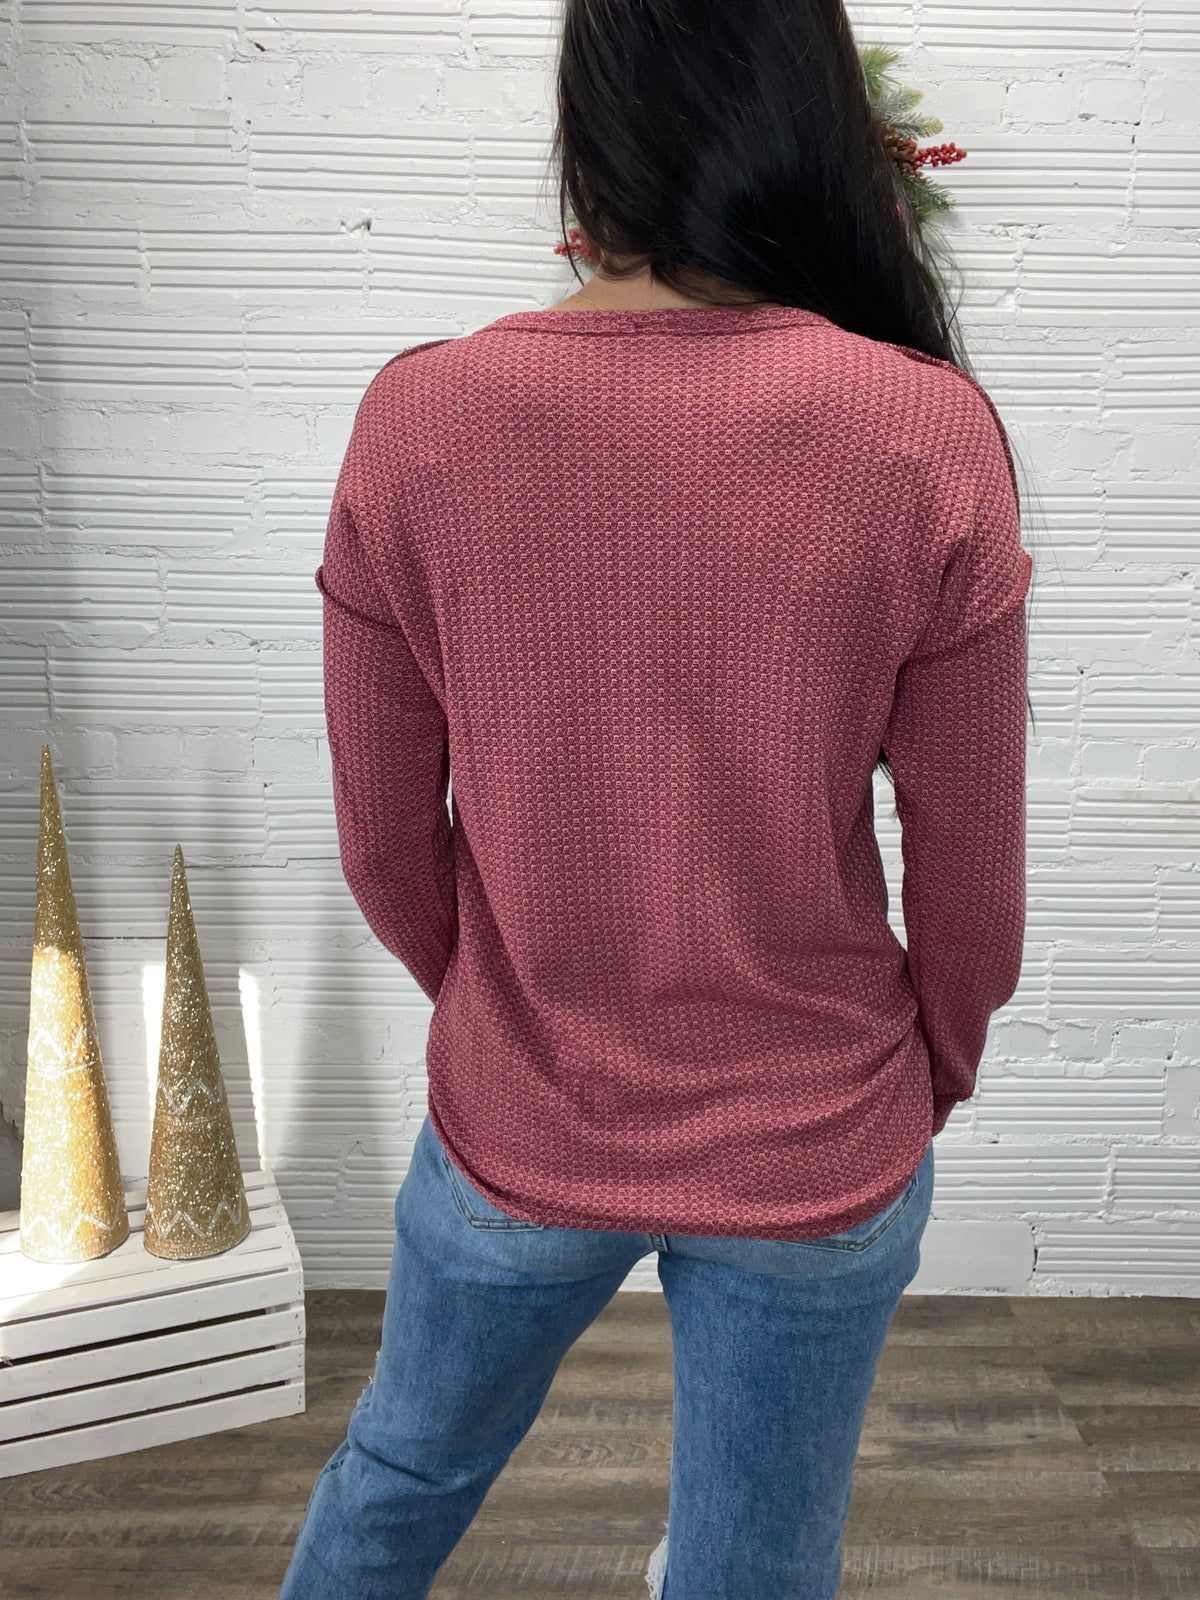 Grow Old With Me- Burgundy Waffle Knit Top